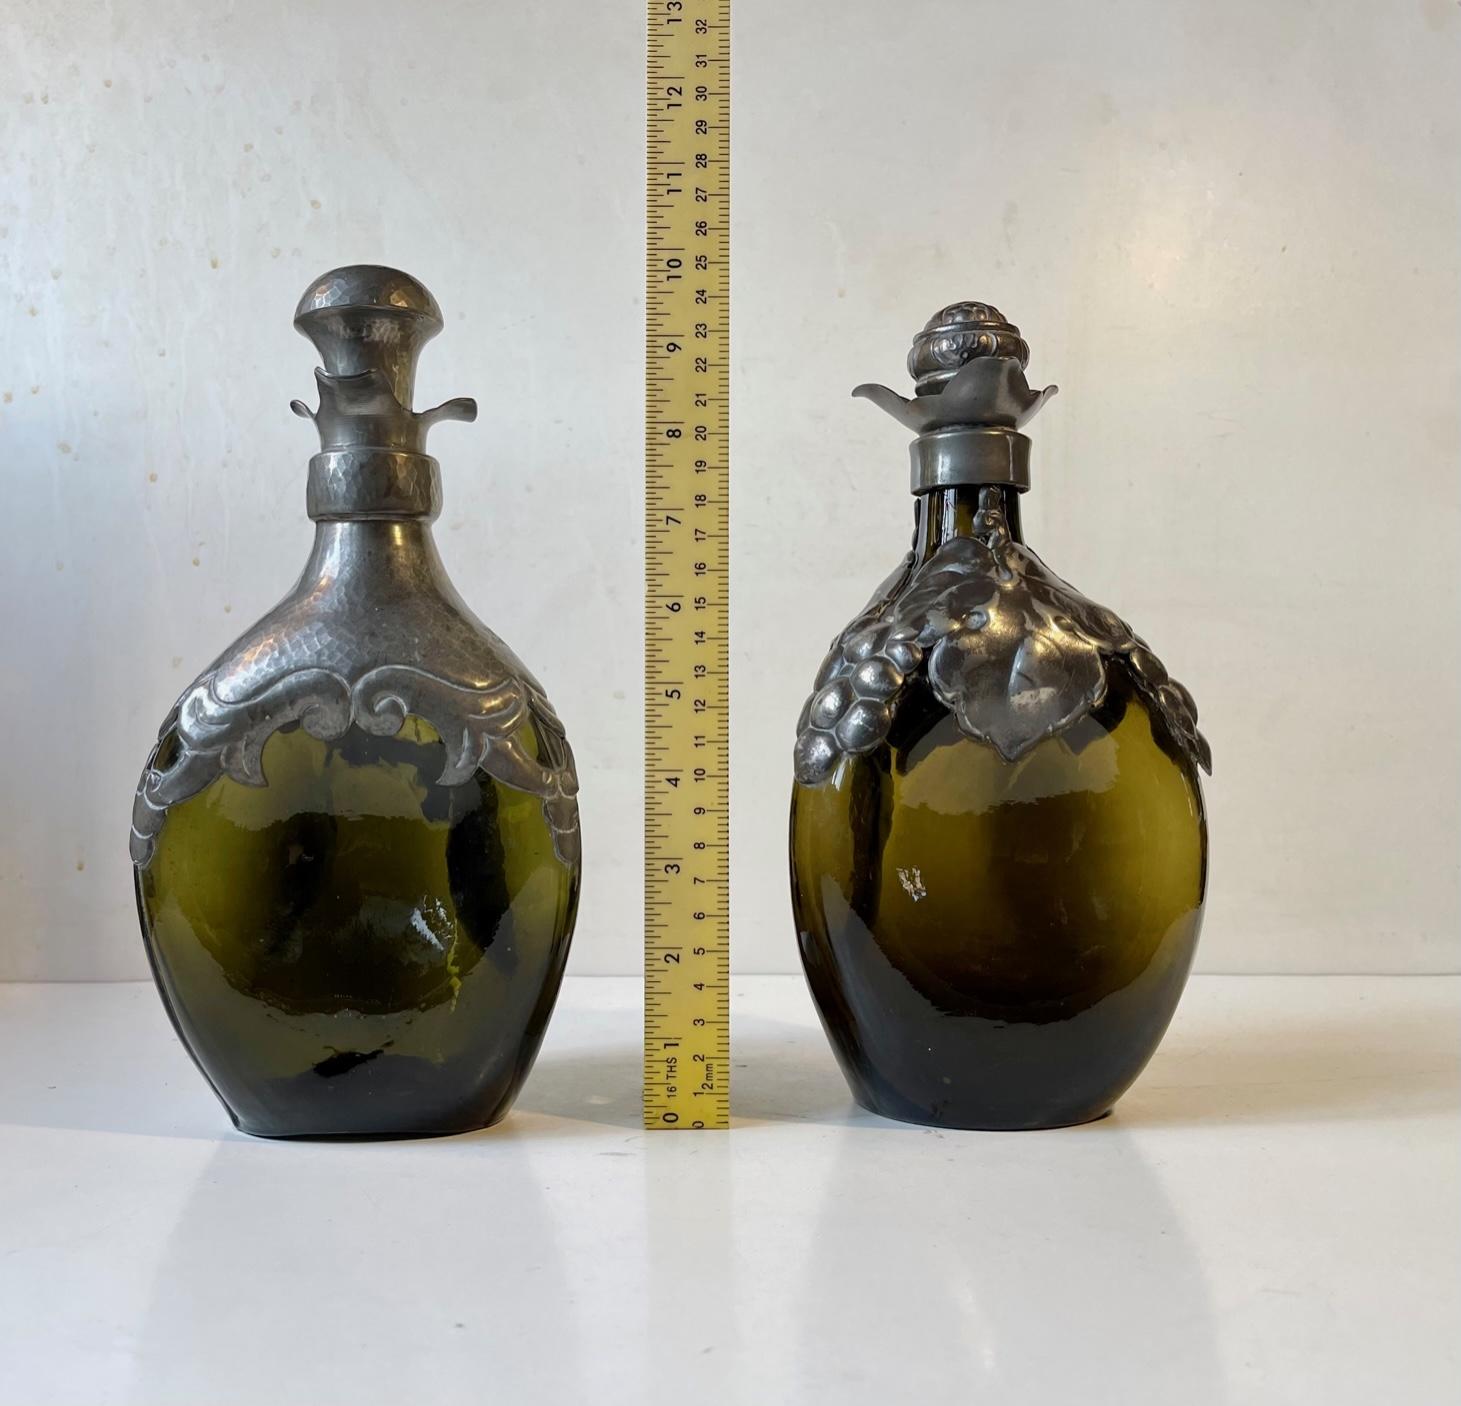 Antique Danish Art Nouveau Decanters in Green Glass and Pewter, 1910s For Sale 3